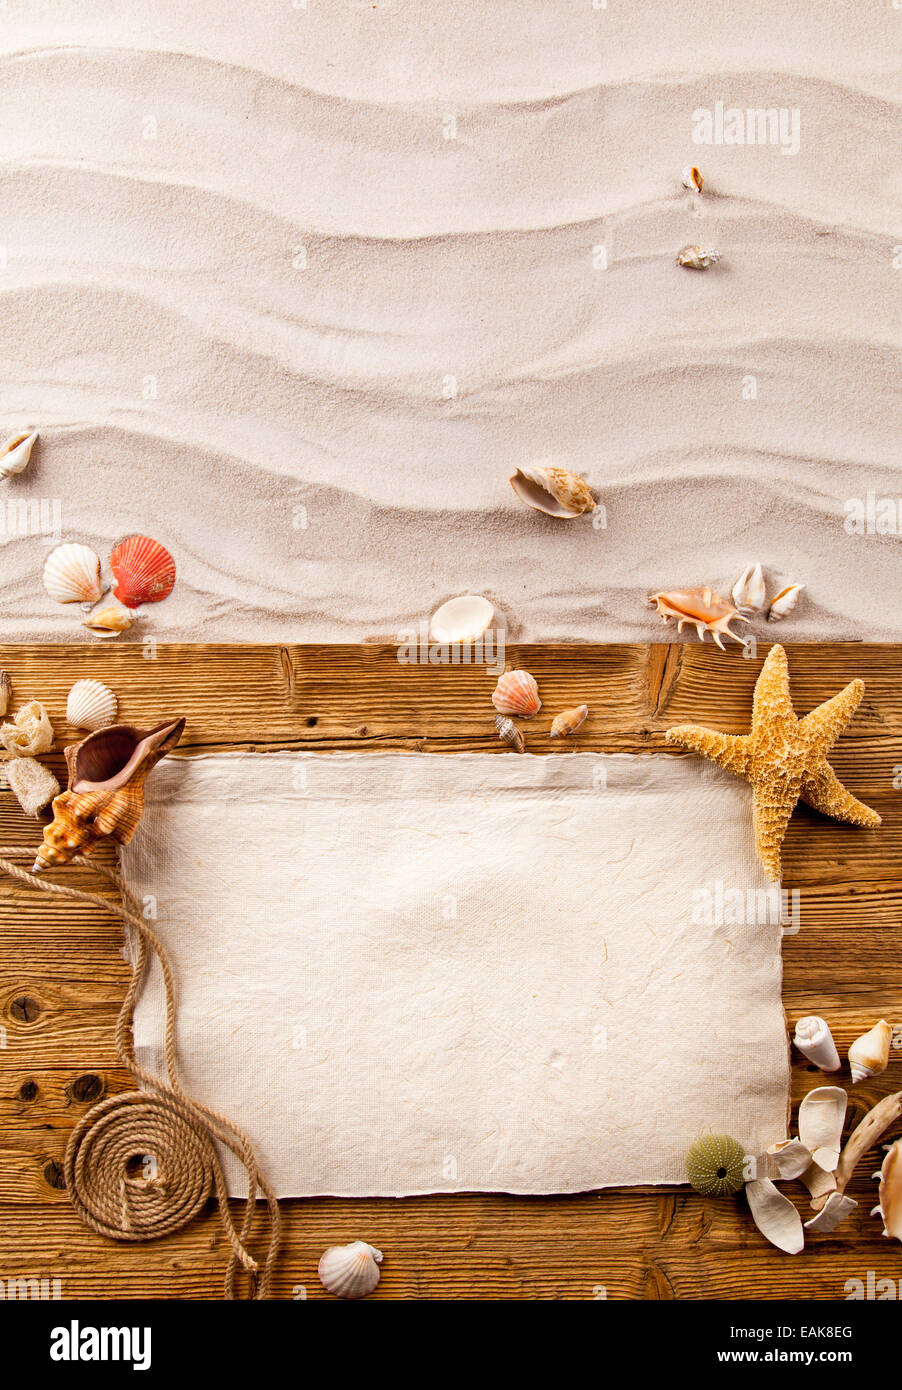 Concept of summer beach with starfish, shells and empty paper on wood Stock Photo